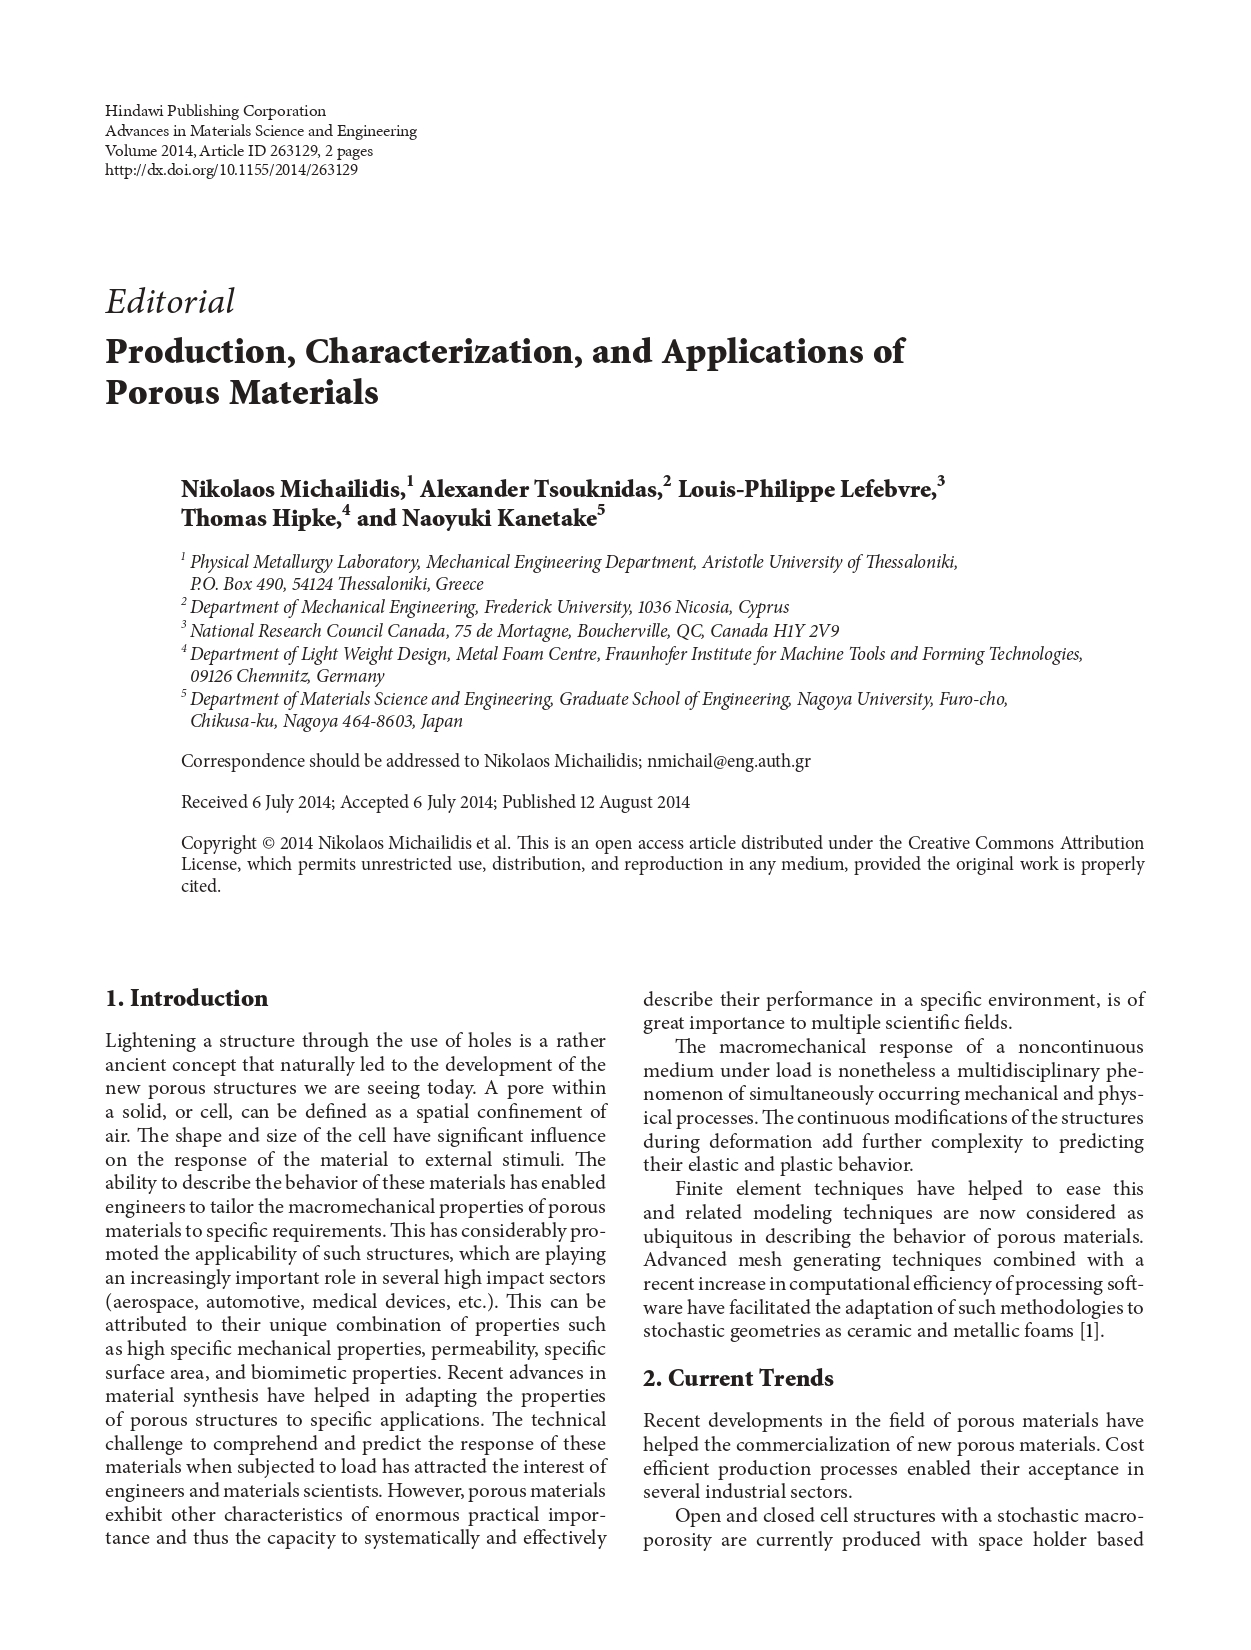 Production, characterization, and applications of porous materials_page-0001.jpg